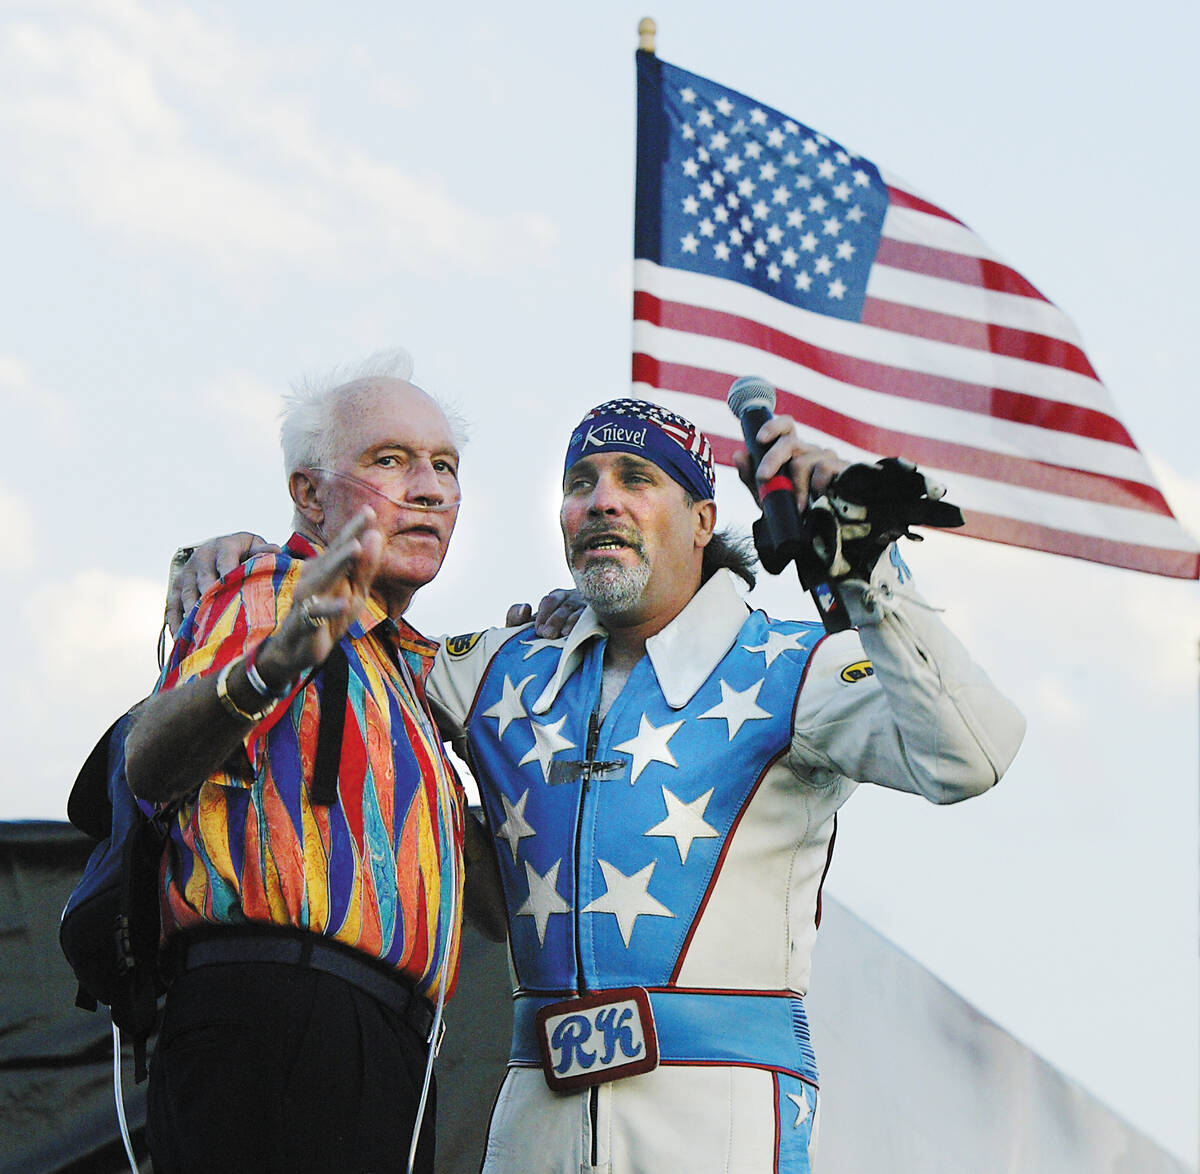 Daredevil Evel Knievel and his son and fellow daredevil Robbie Knievel embrace at the top of th ...